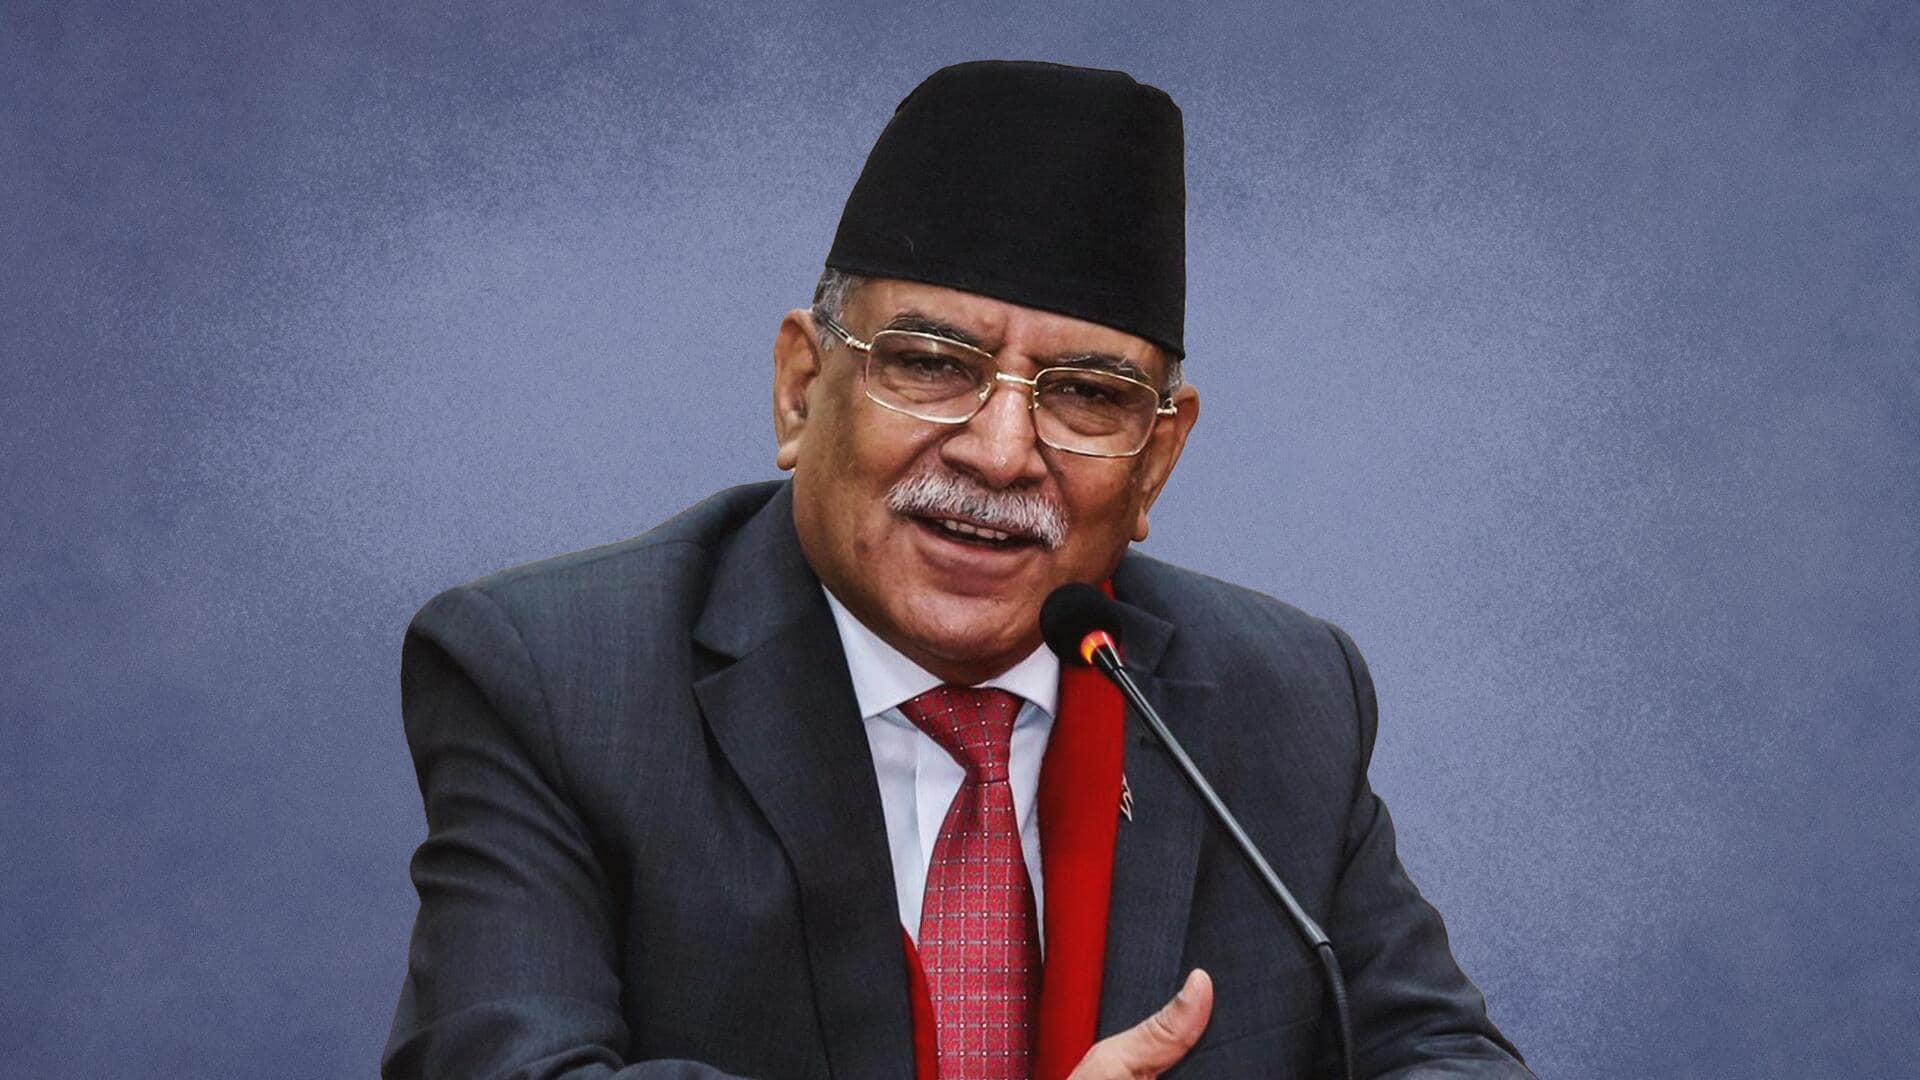 Nepal: Opposition demands Prachanda's resignation over 'India appoints PM' row